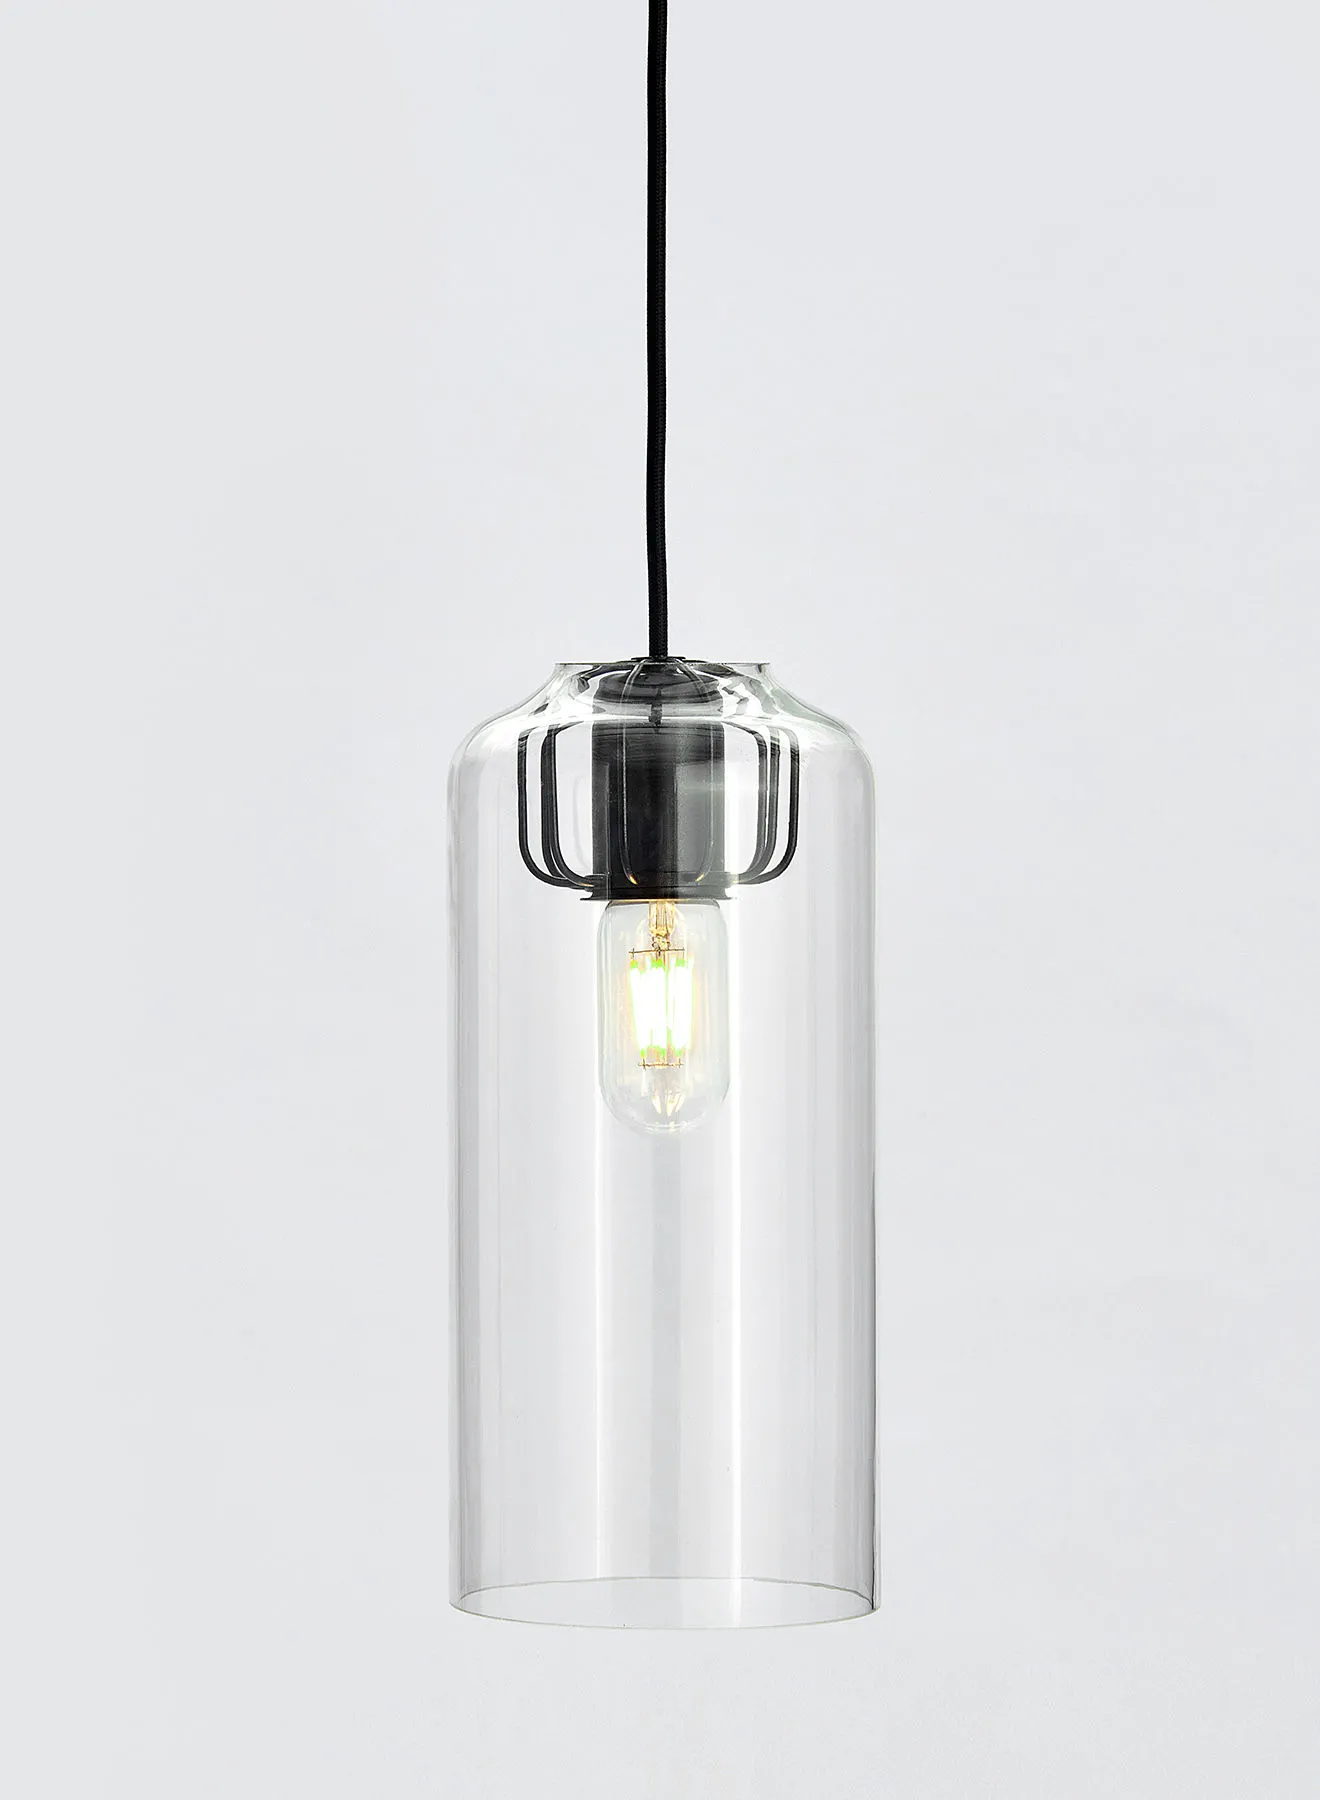 Switch Decorative Pendant Lamp Unique Luxury Quality Material for the Perfect Stylish Home PL020540 Clear/Black 14cm